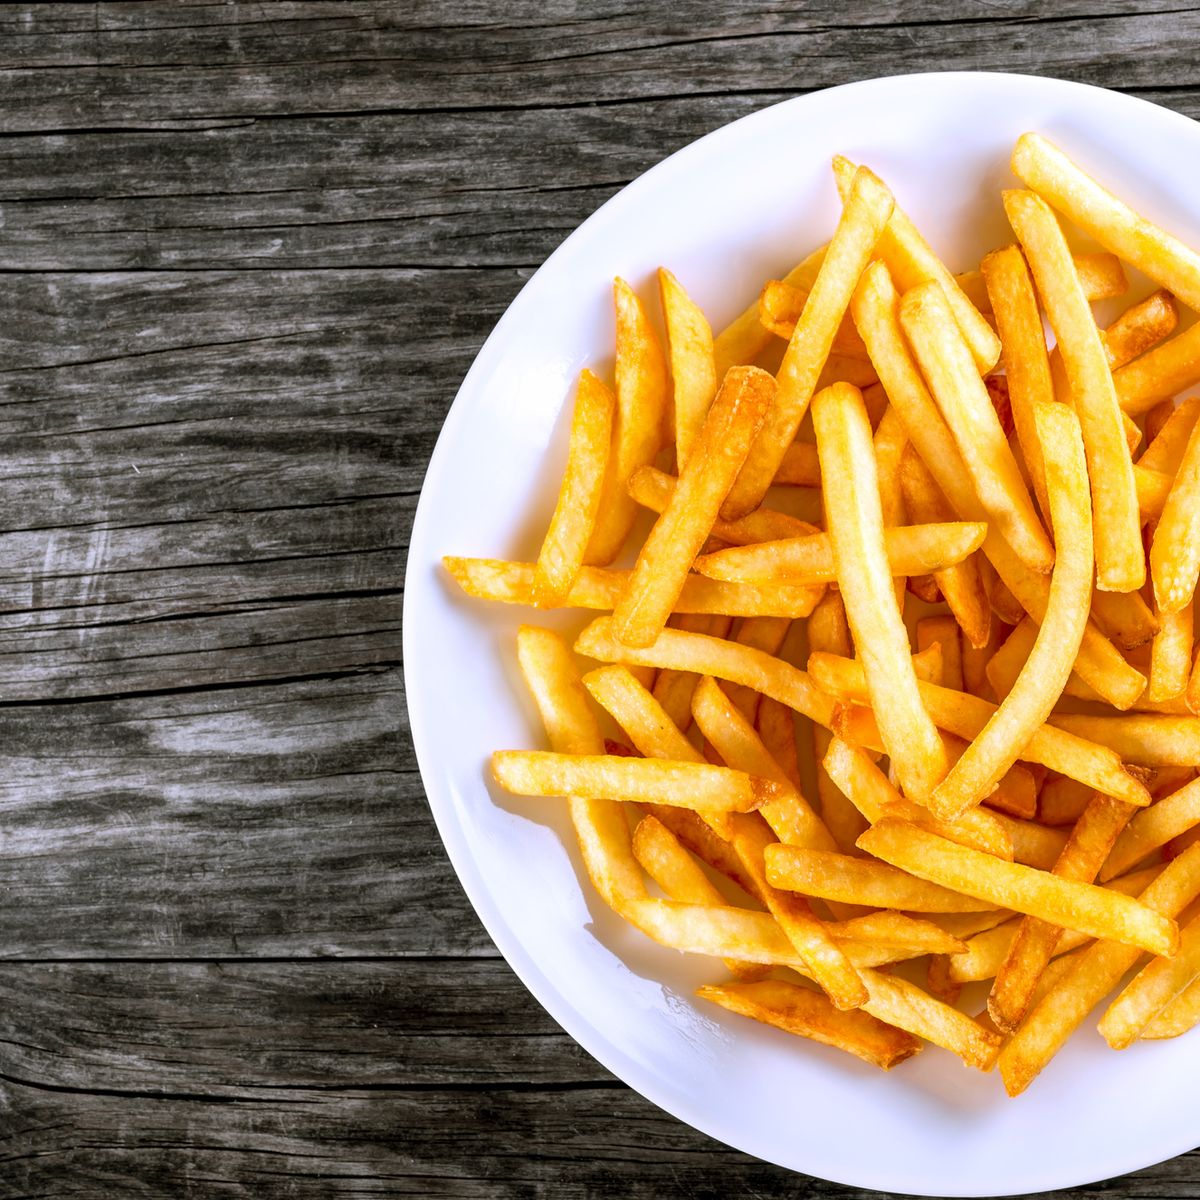 Is Air Frying Healthy? What a Dietitian Says